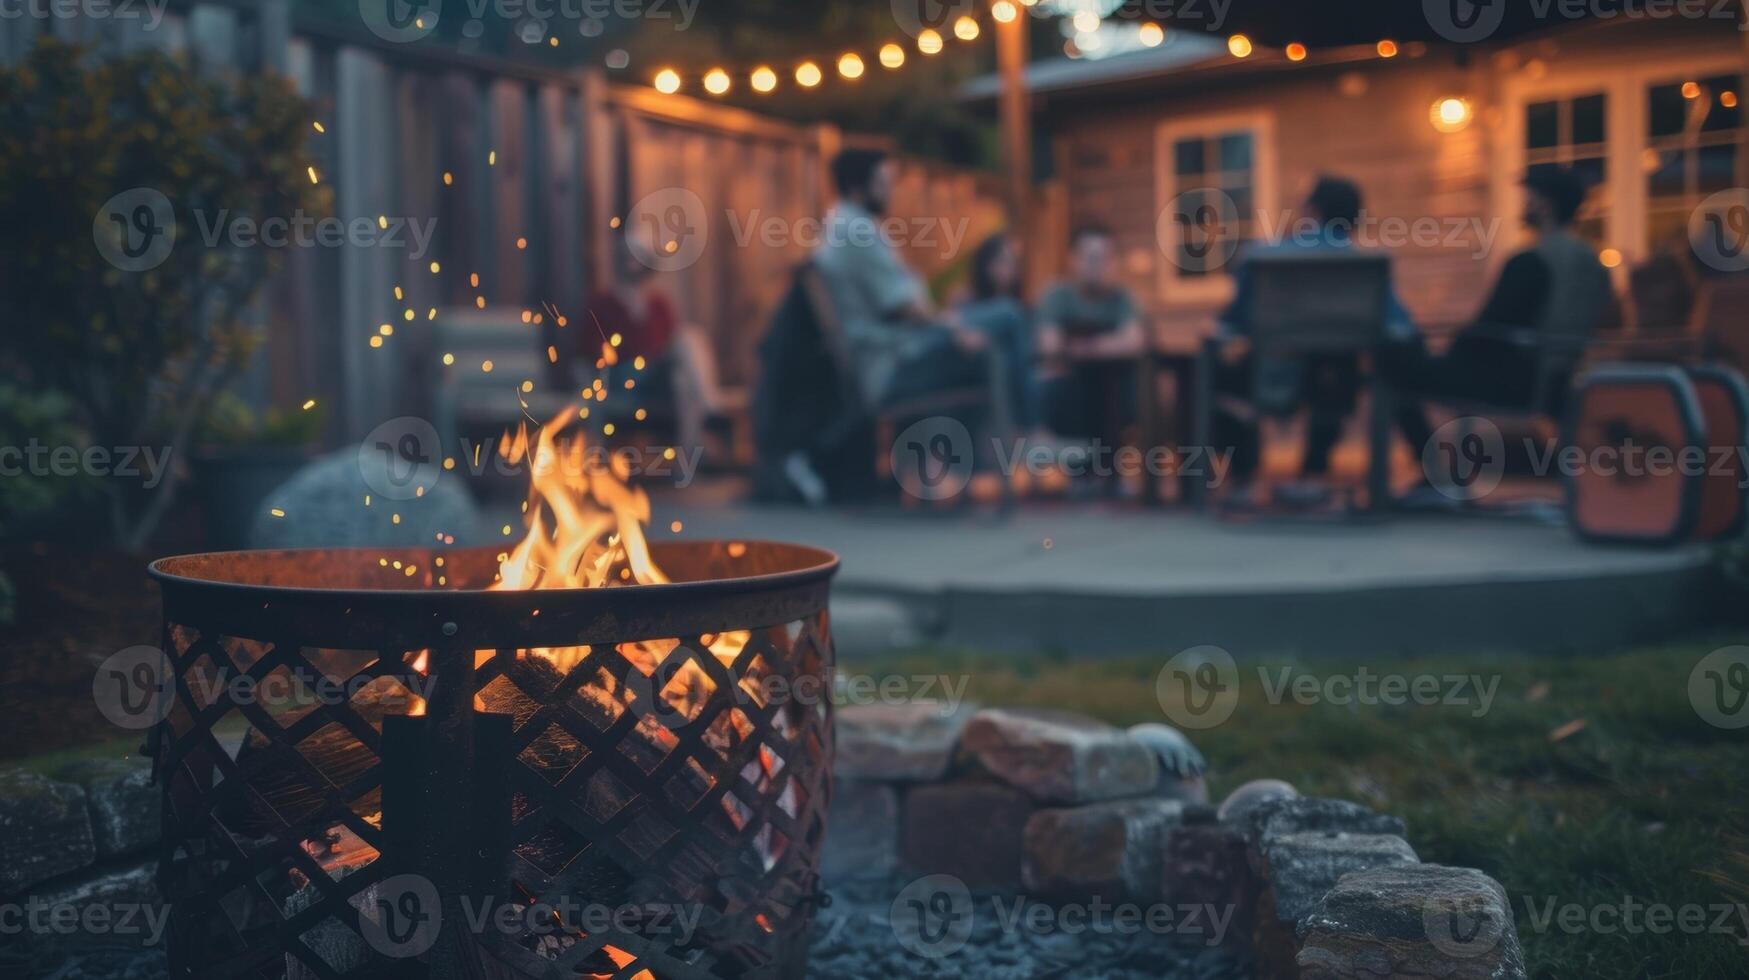 A group of friends sitting around a fire pit in the backyard passing around a portable speaker and taking turns adding songs to their collaborative relaxation playlist photo